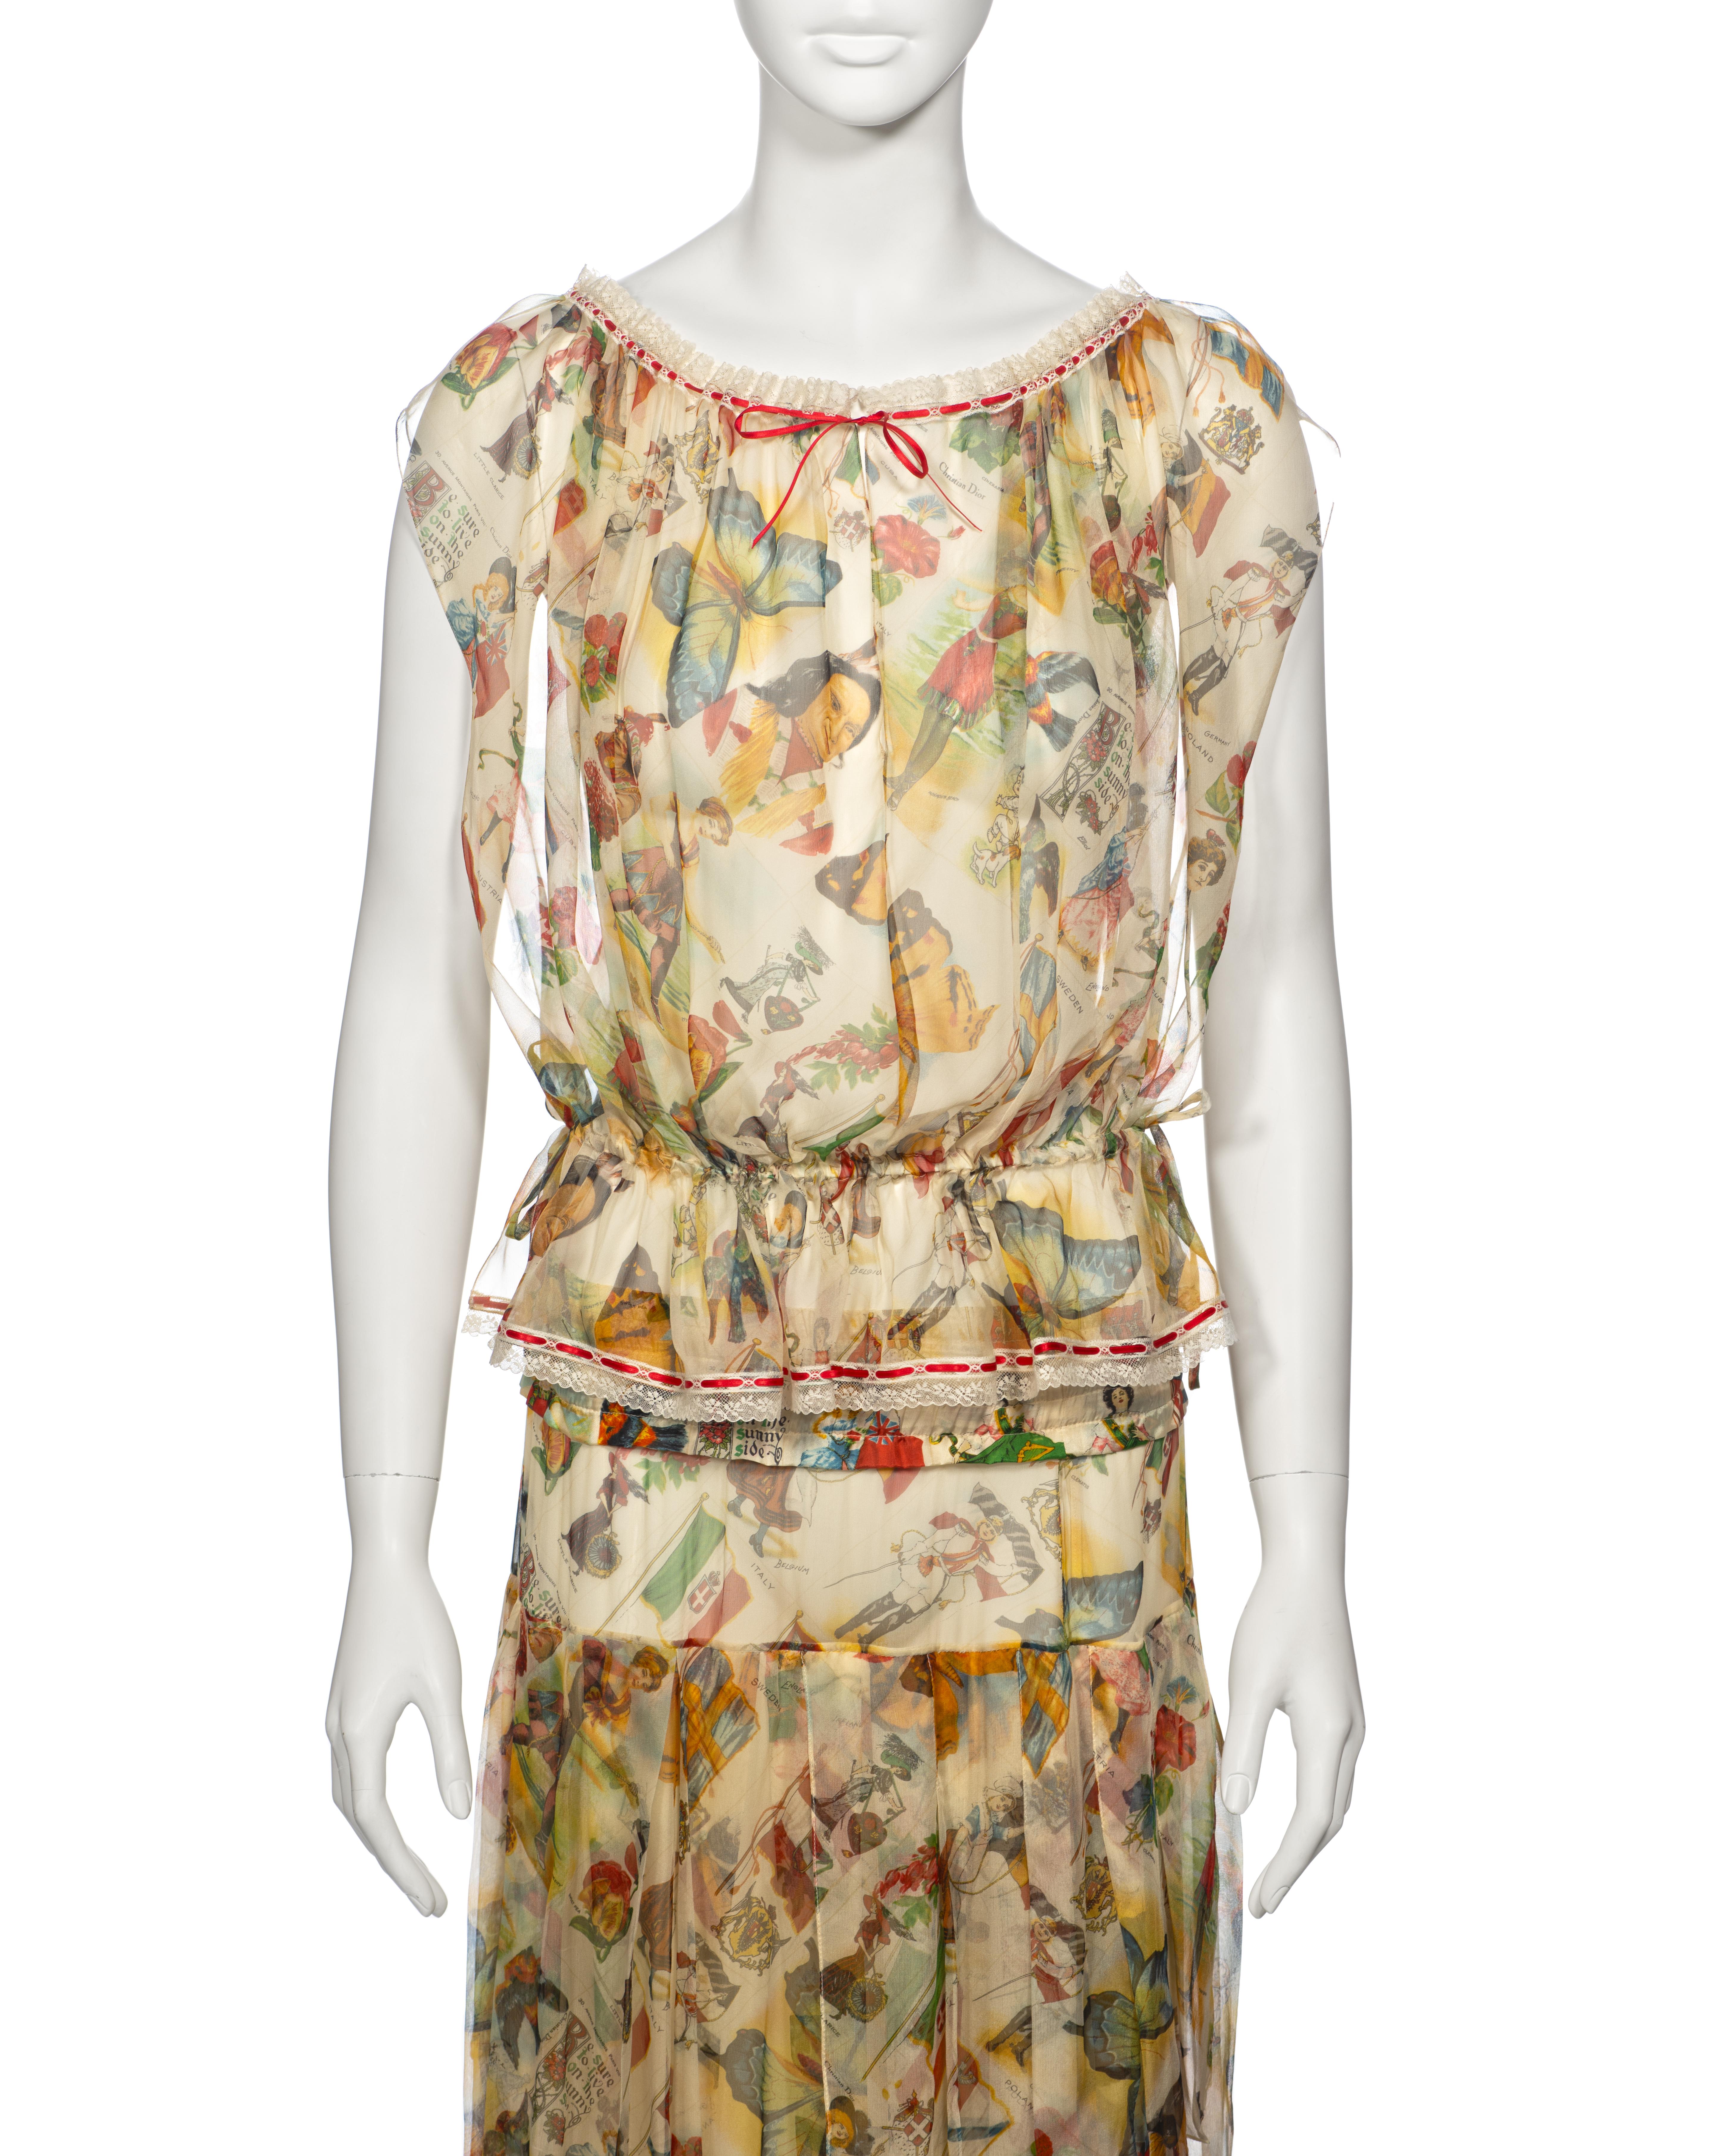 Women's Christian Dior by John Galliano Victoria Print Silk Blouse and Skirt, ss 2002 For Sale